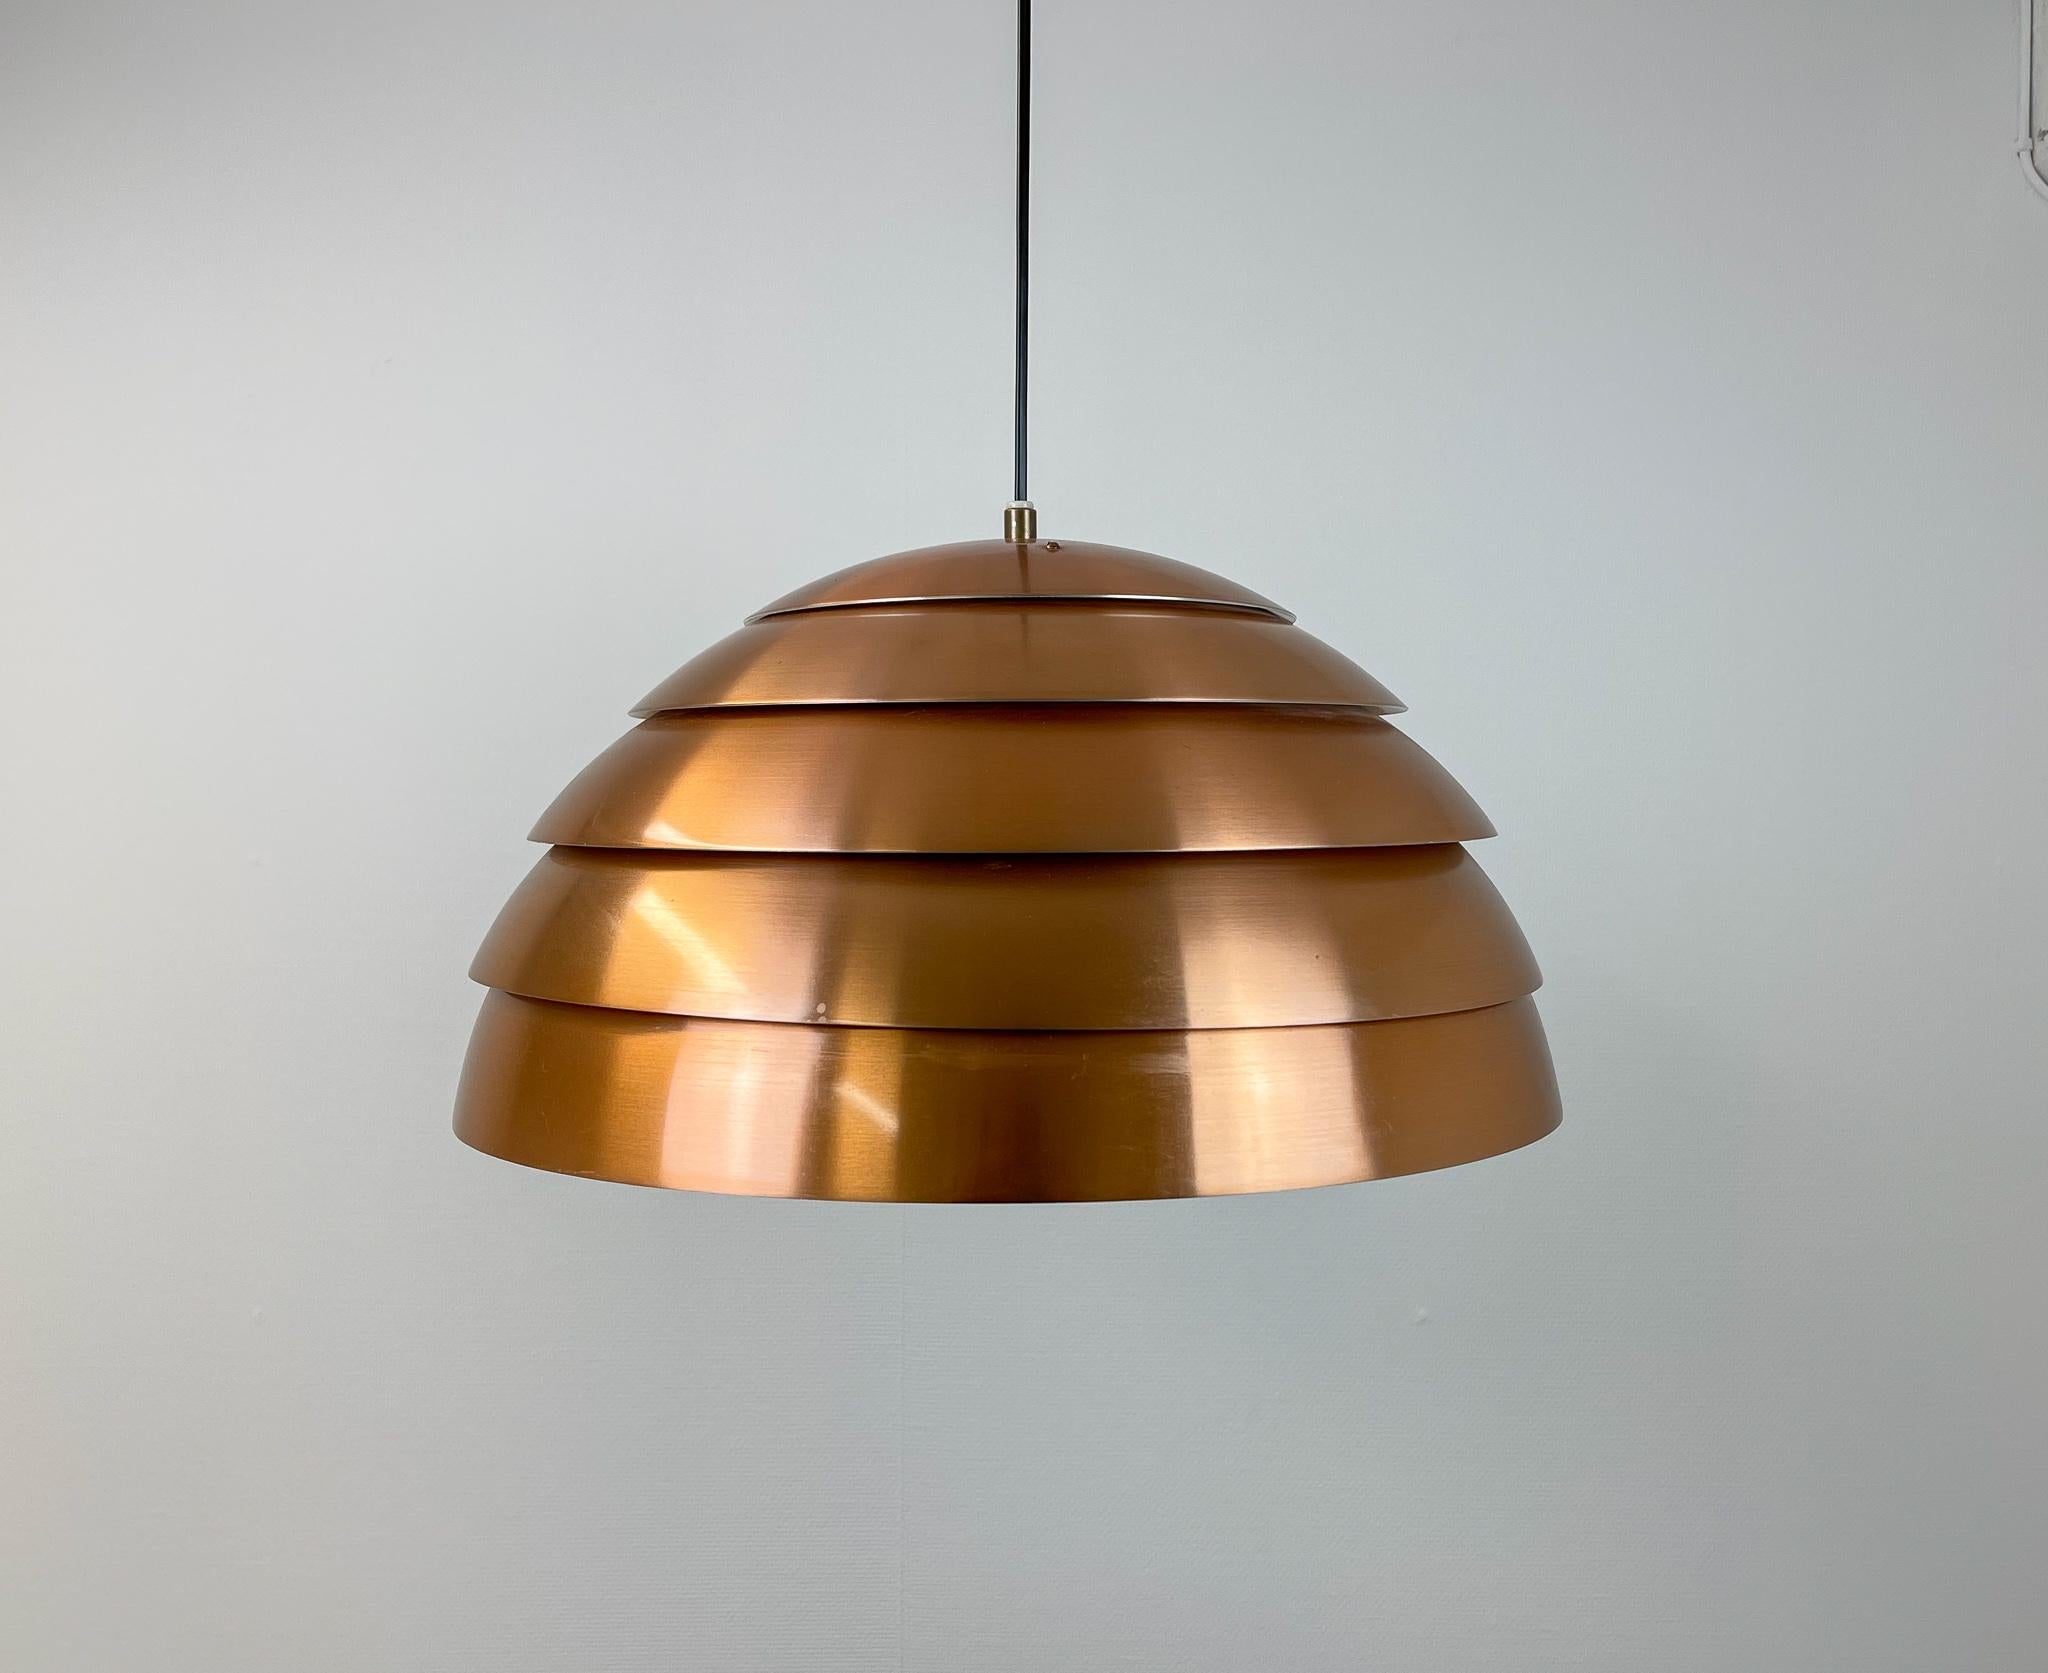 This large pendant in copper model T325/450 by Hans Agne Jakobsson Markaryd with soft non-dazzle light, the perfect light for a dining table, produced by Hans-Agne Jakobsson for the Swedish company AB Markaryd. 

Good working vintage condition,